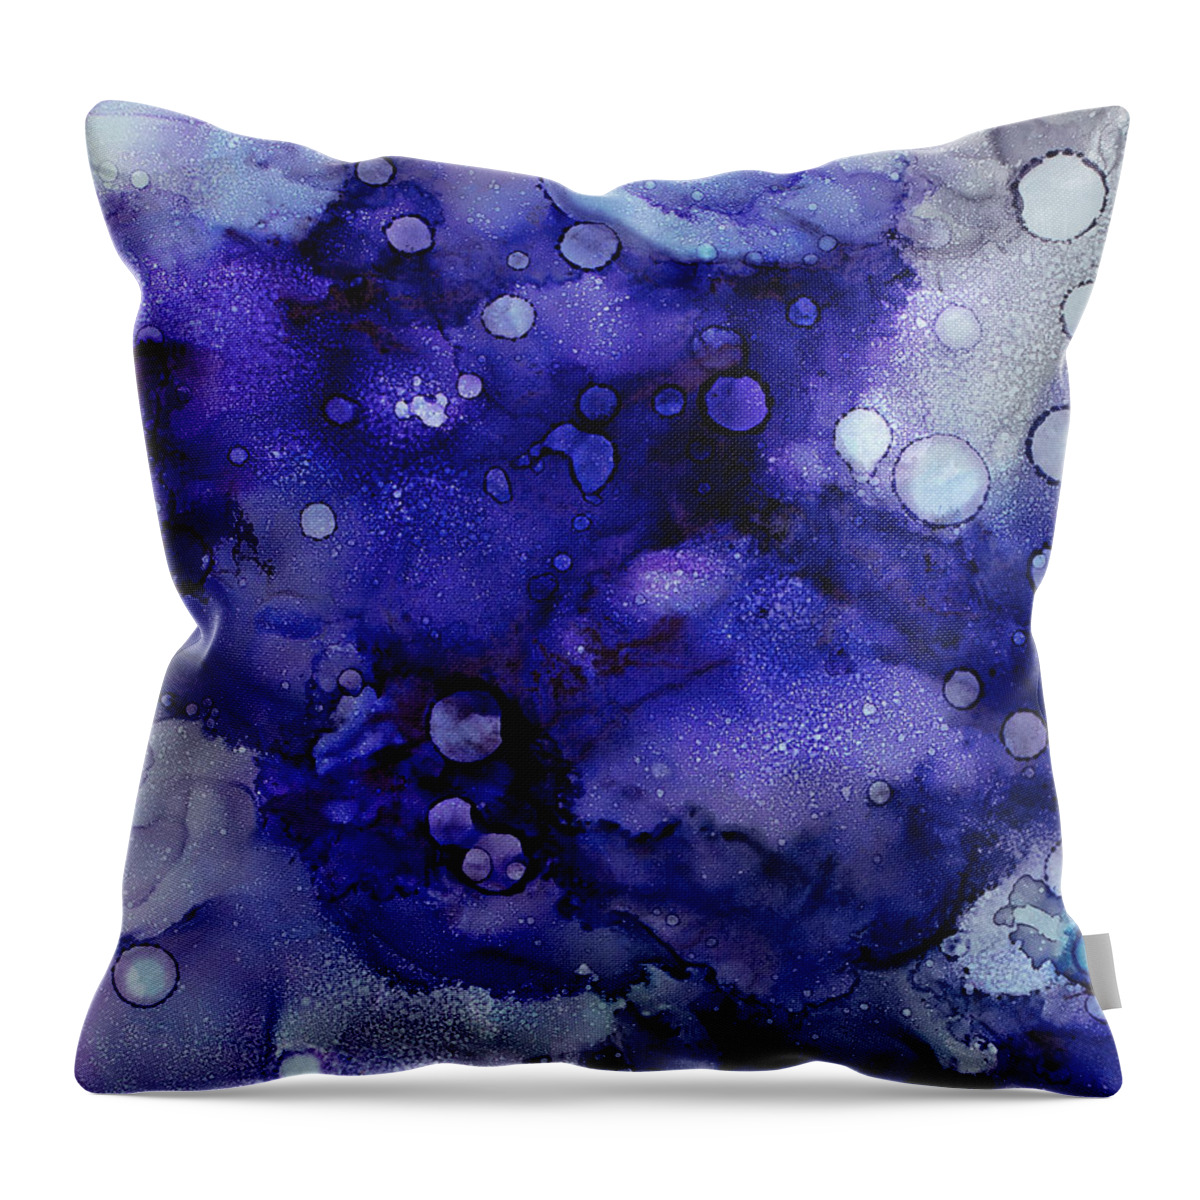 Space Throw Pillow featuring the painting Odyssey by Tamara Nelson